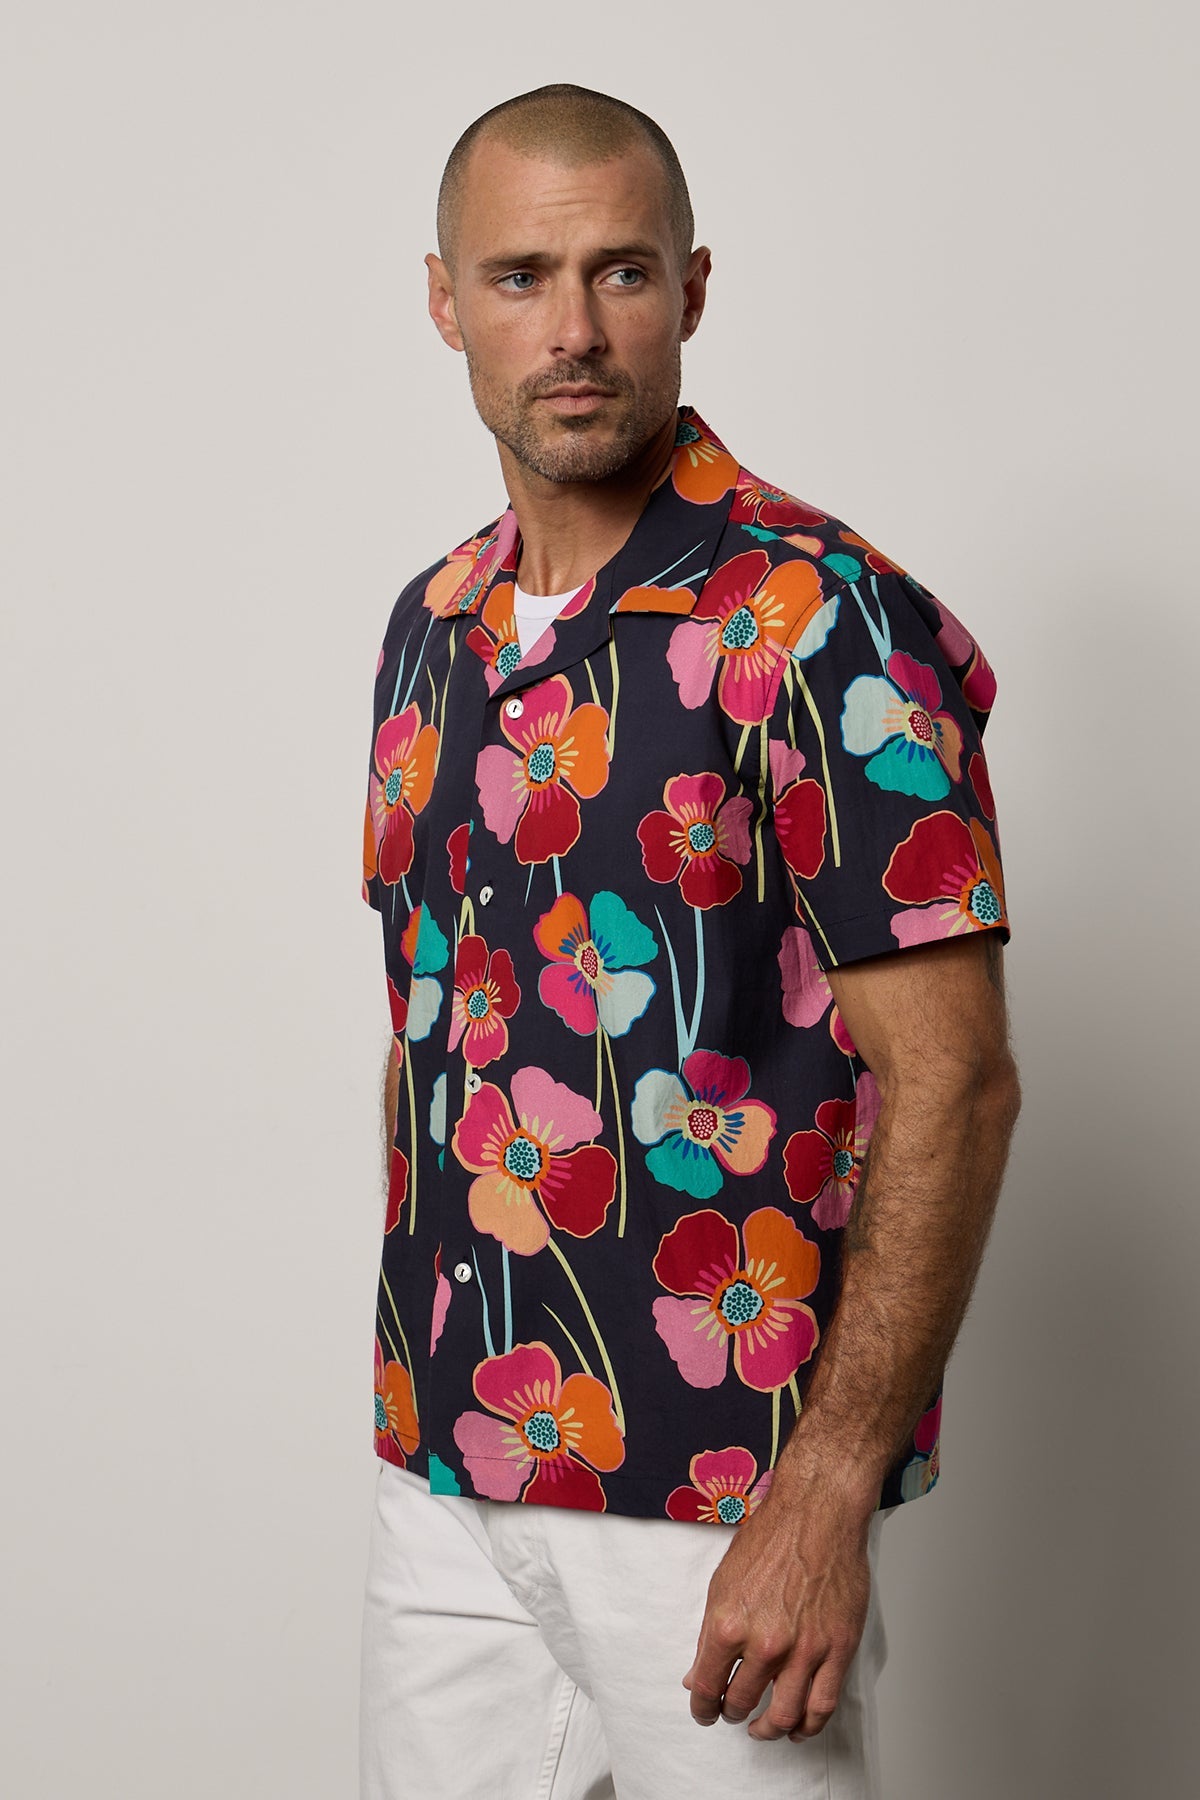 Iggy Button up shirt in Bahama print with large bold modern flower print on dark background with white denim front & side-26801038983361